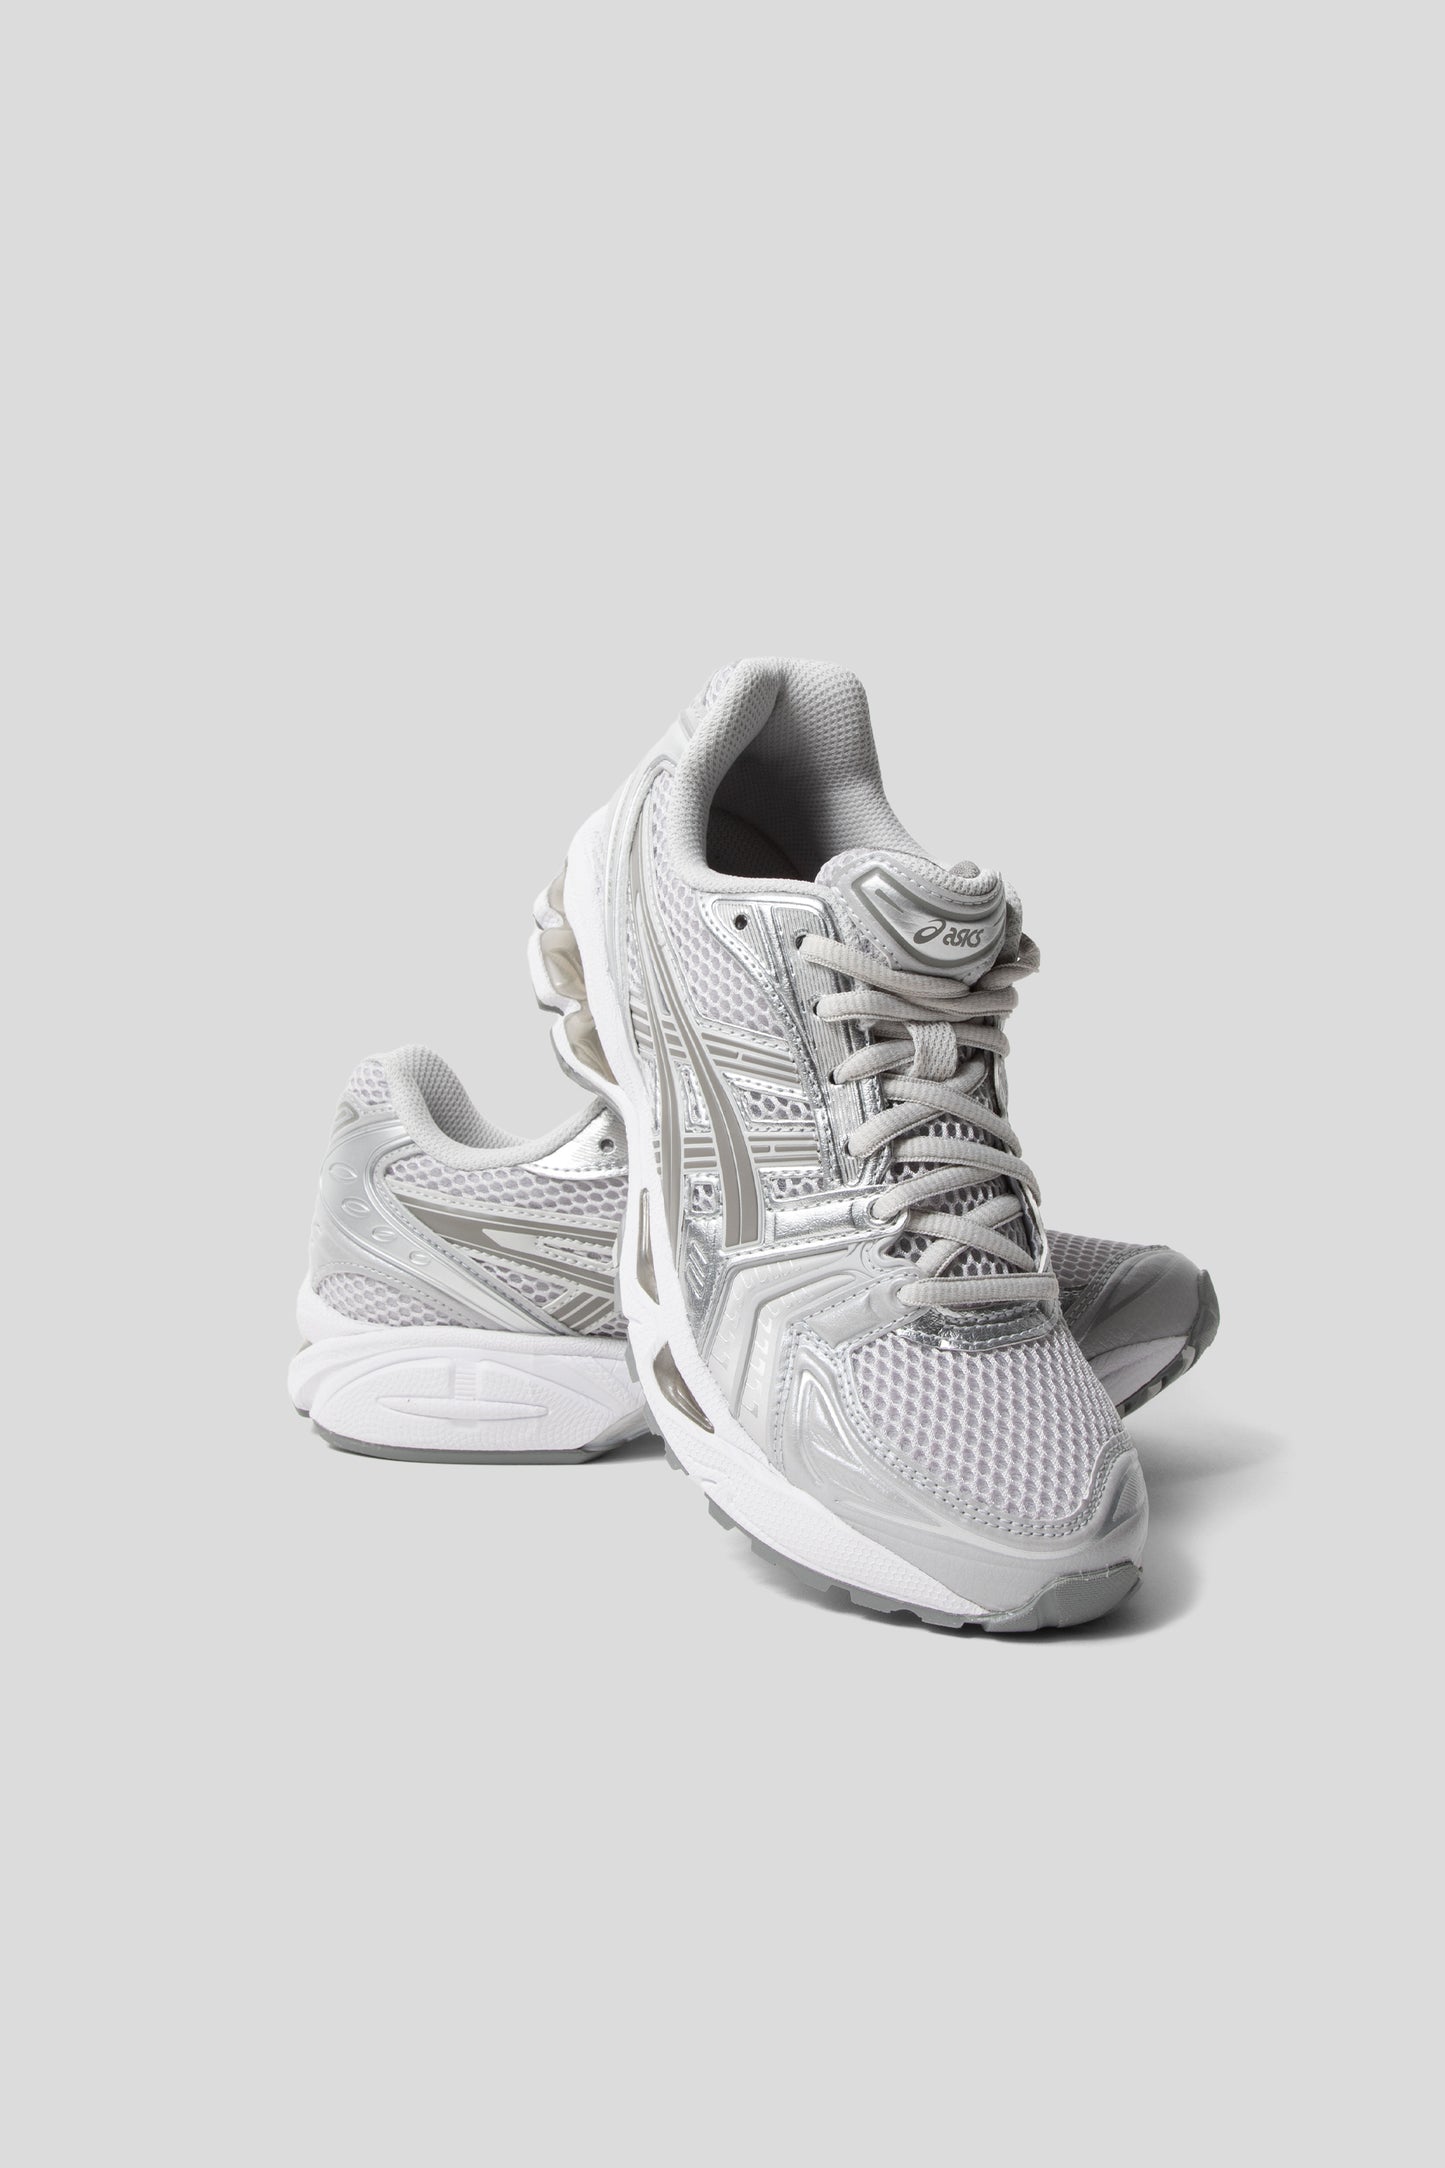 Asics Gel-Kayano 14 Shoes in Cloud Grey and Clay Grey